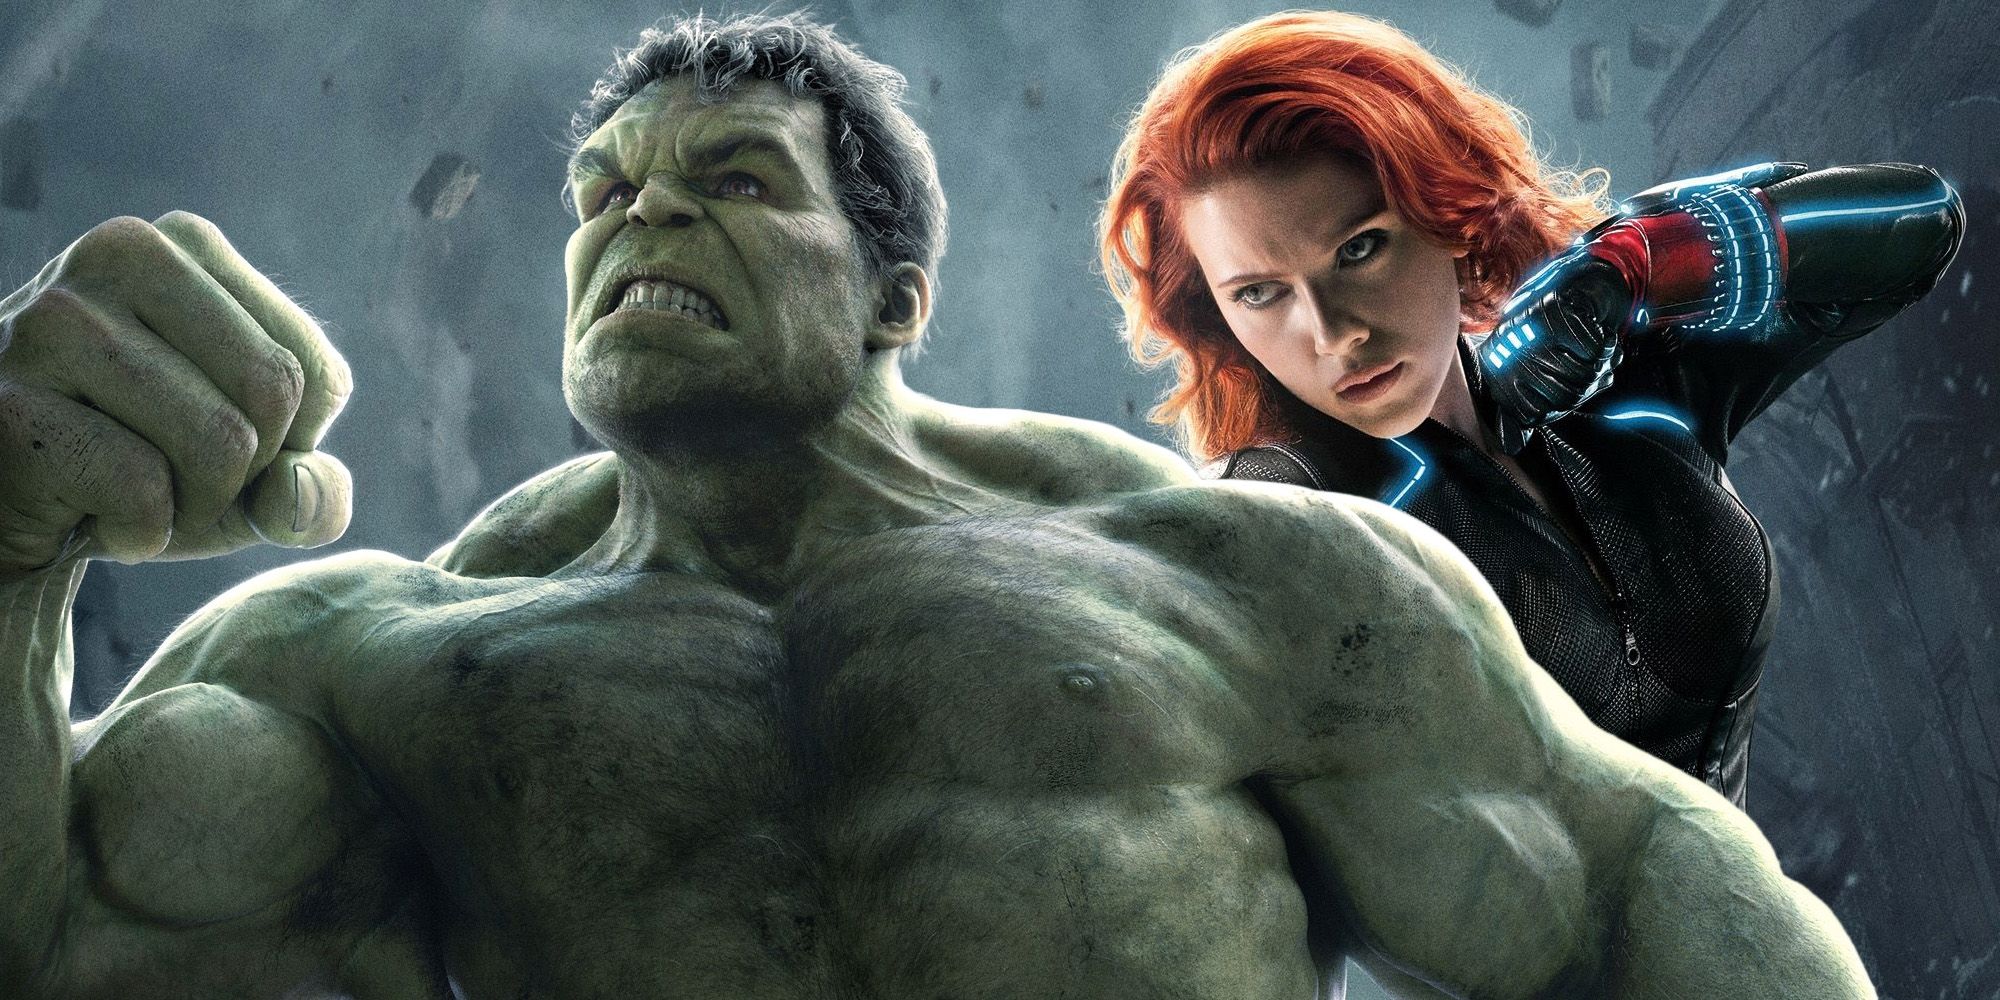 Image of Hulk and Black Widow from Age of Ultron